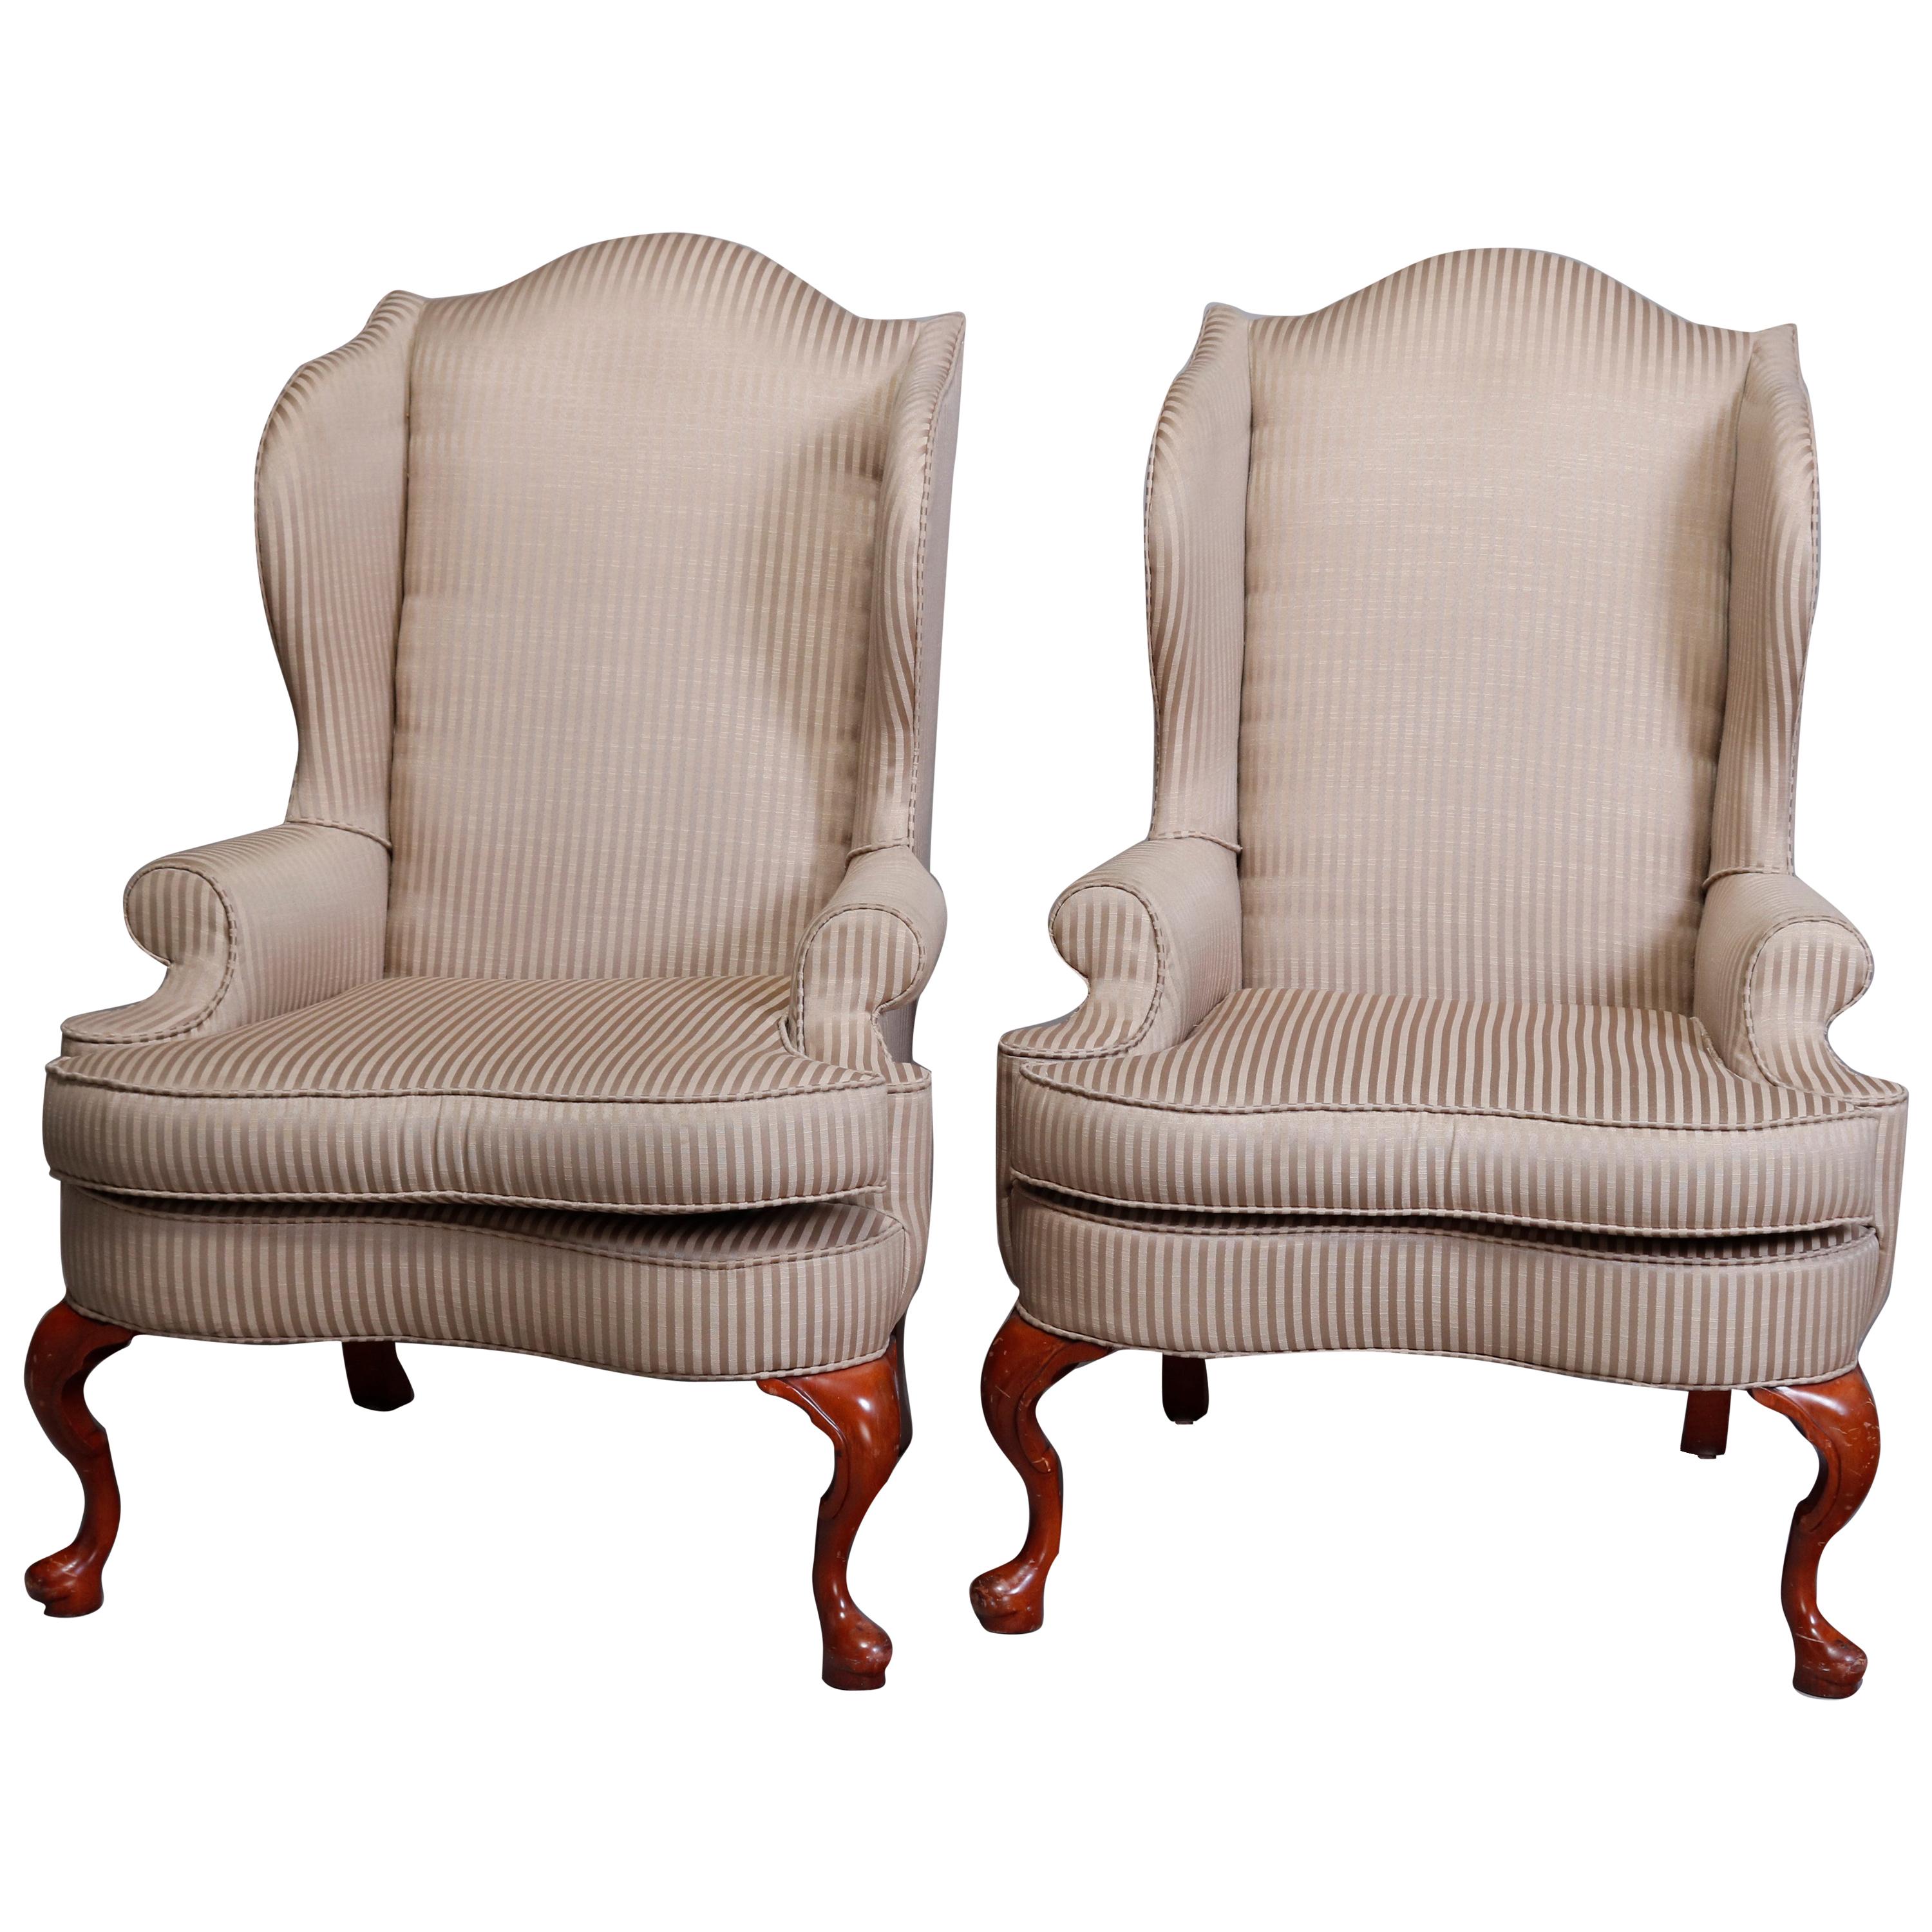 Pair of Queen Anne Style Fireside Wingback Chairs, Striped Upholstery